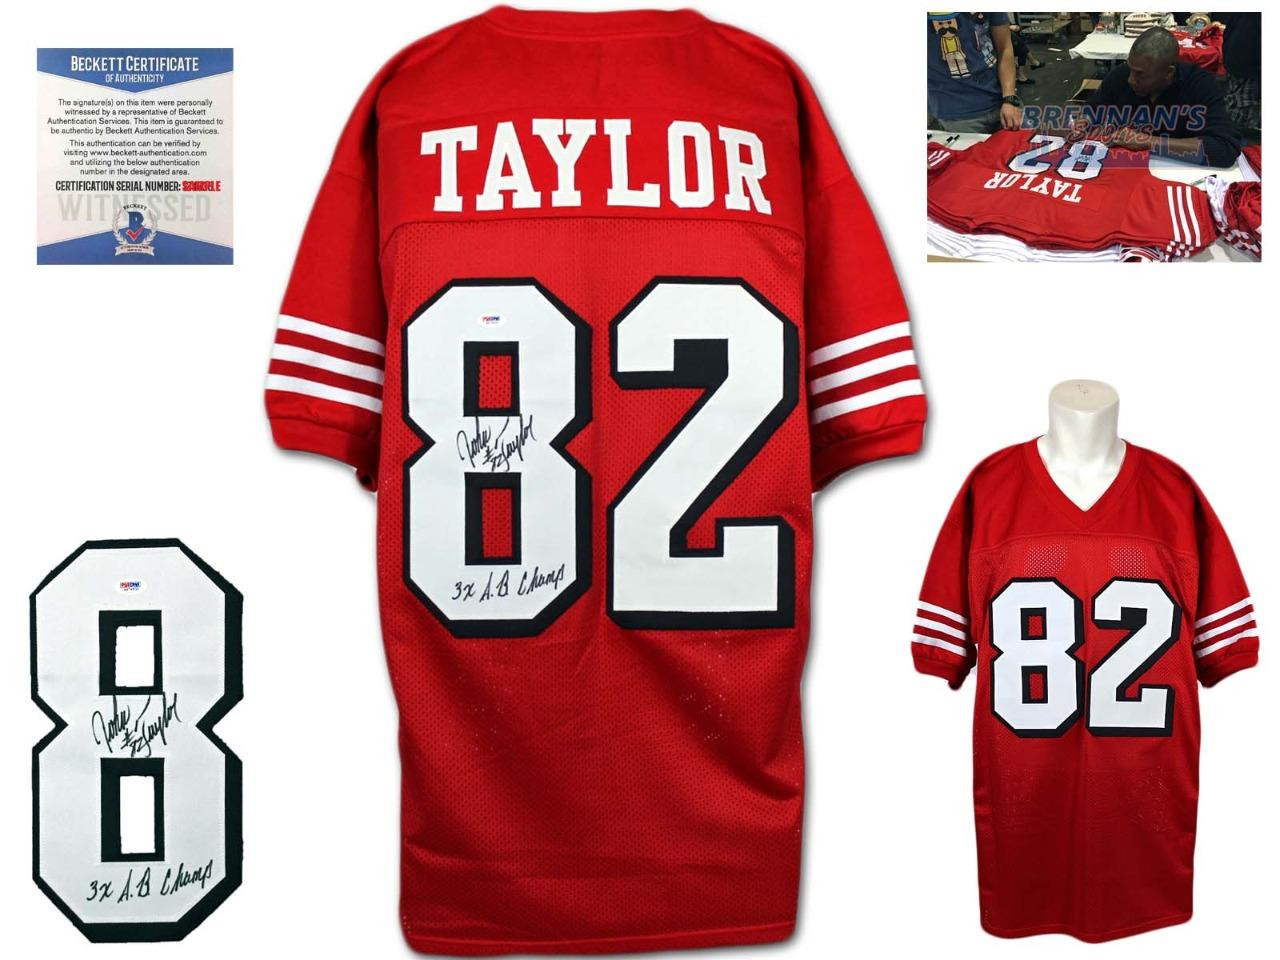 John Taylor Autographed Signed Jersey 